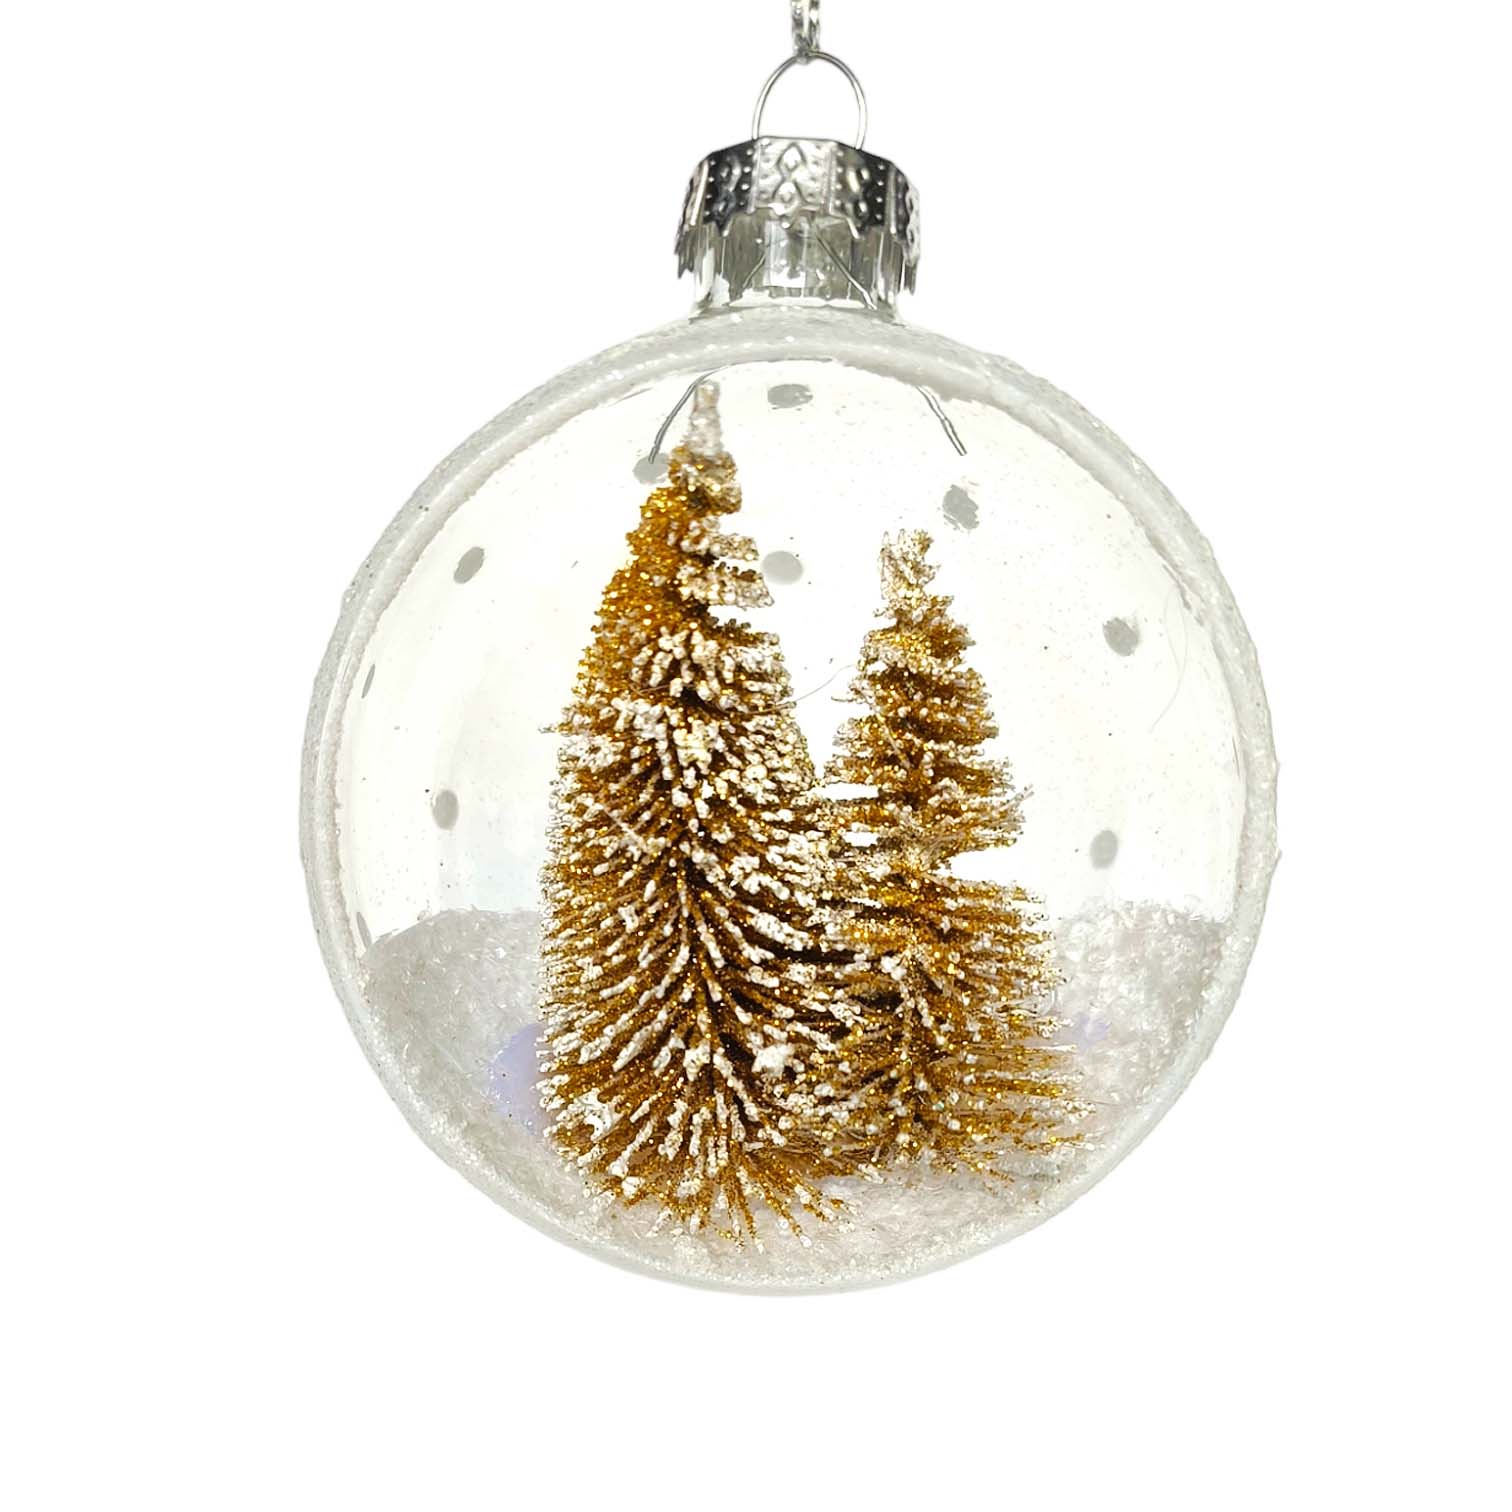 Glass Decoration Ideas glass decoration for christmas for a Sophisticated Look